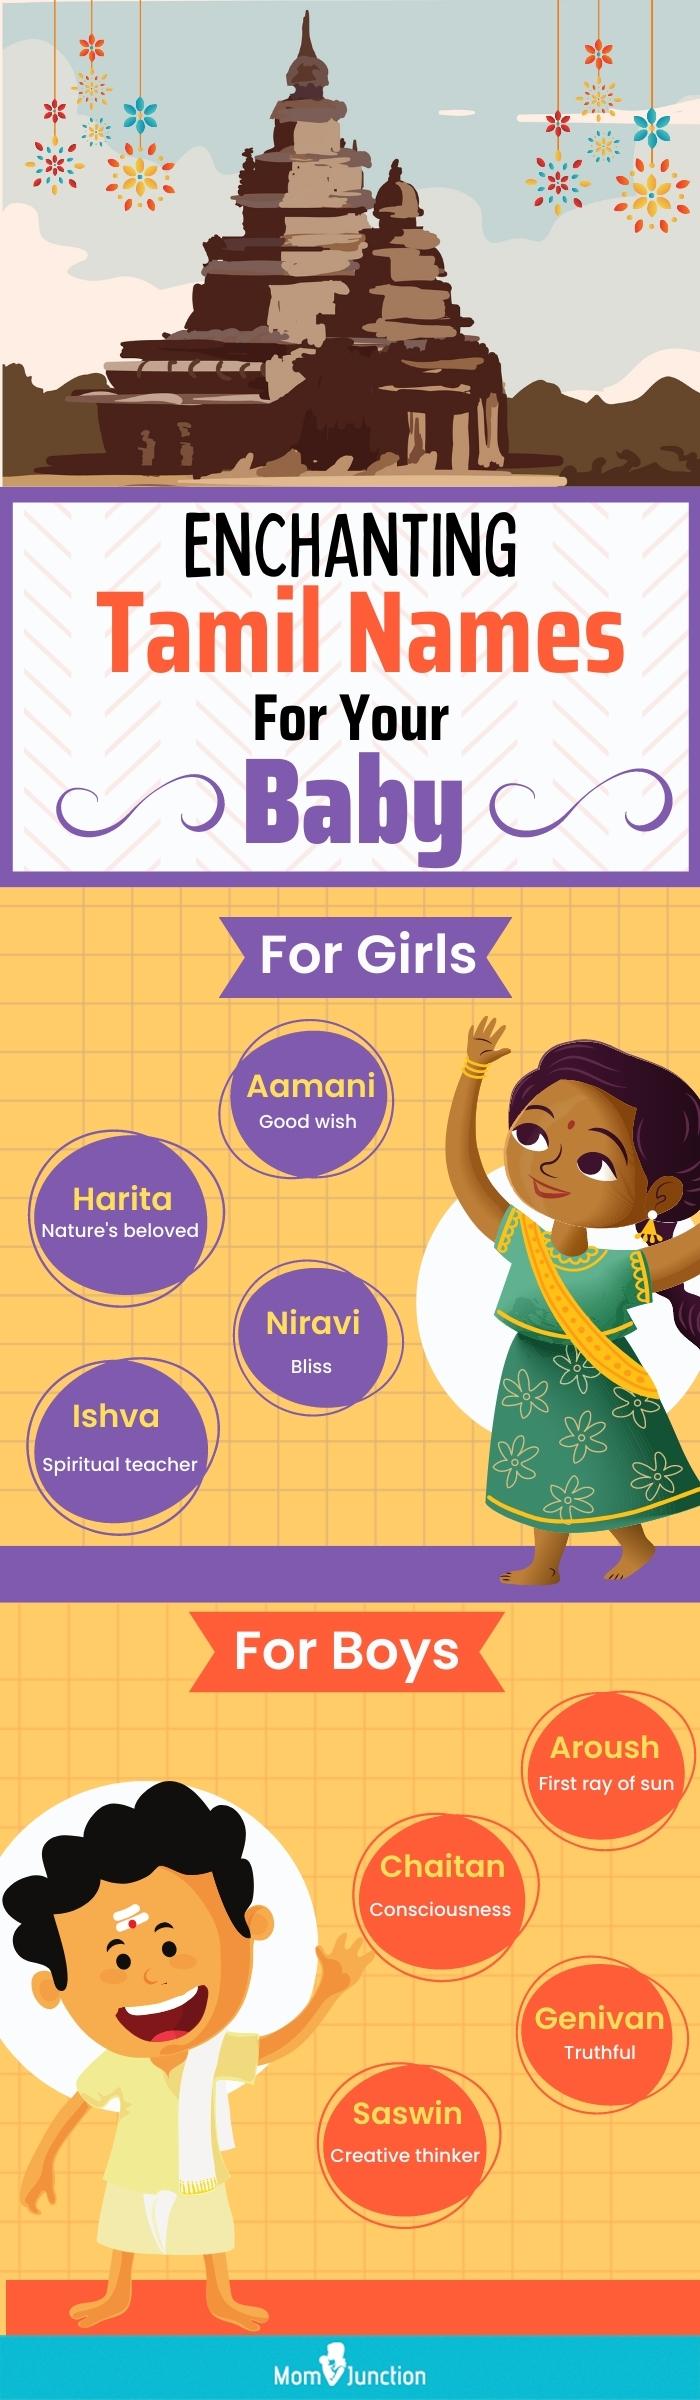 enchanting tamil names for your baby [infographic]